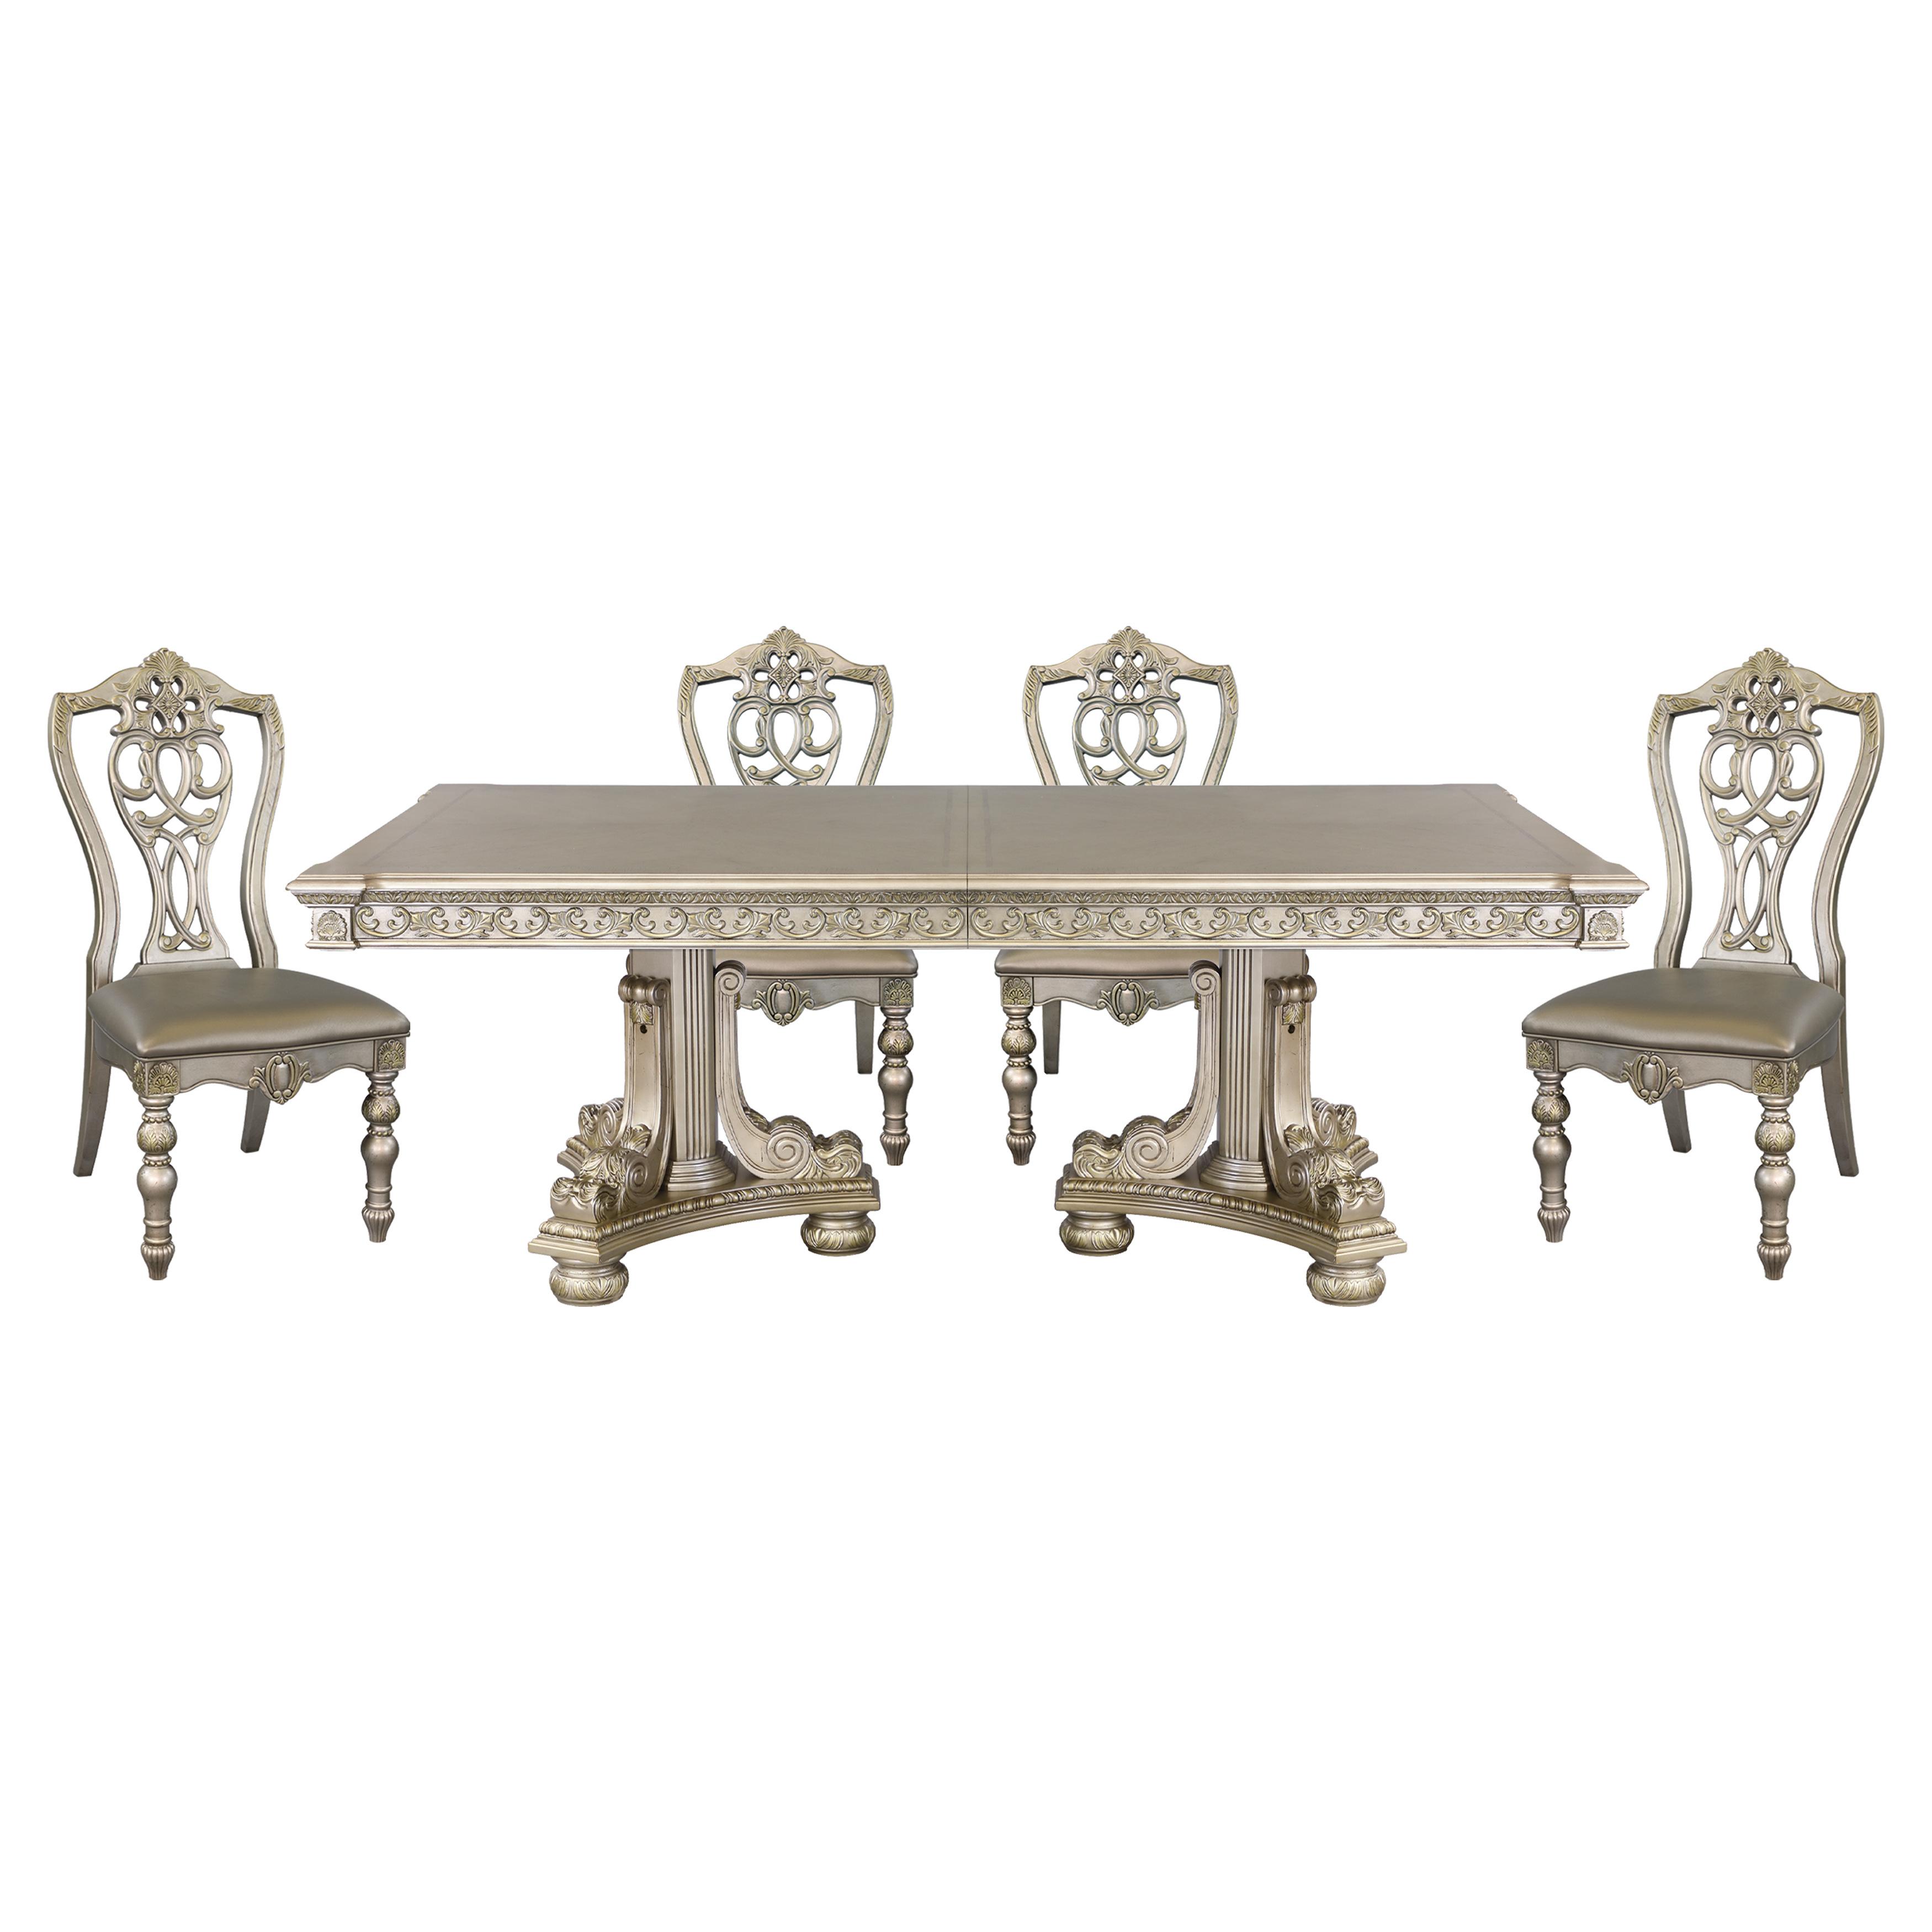 Traditional Dining Room Set 1824PG-112*5PC Catalonia 1824PG-112*5PC in Gold Faux Leather